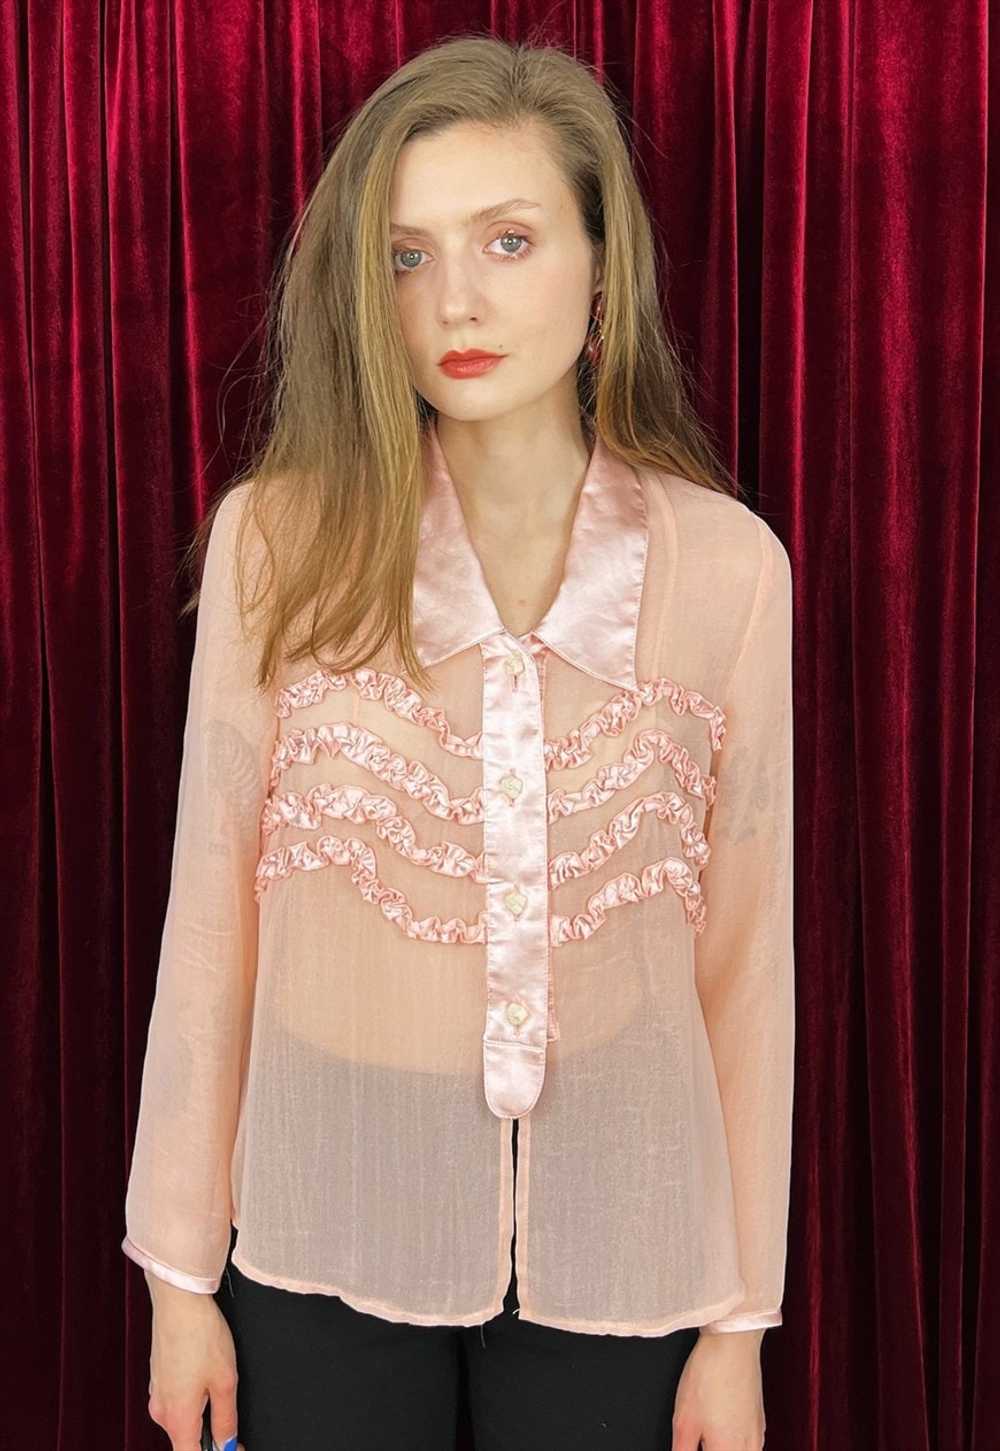 Pink Sheer chiffon blouse, Coquette aesthetic - image 2